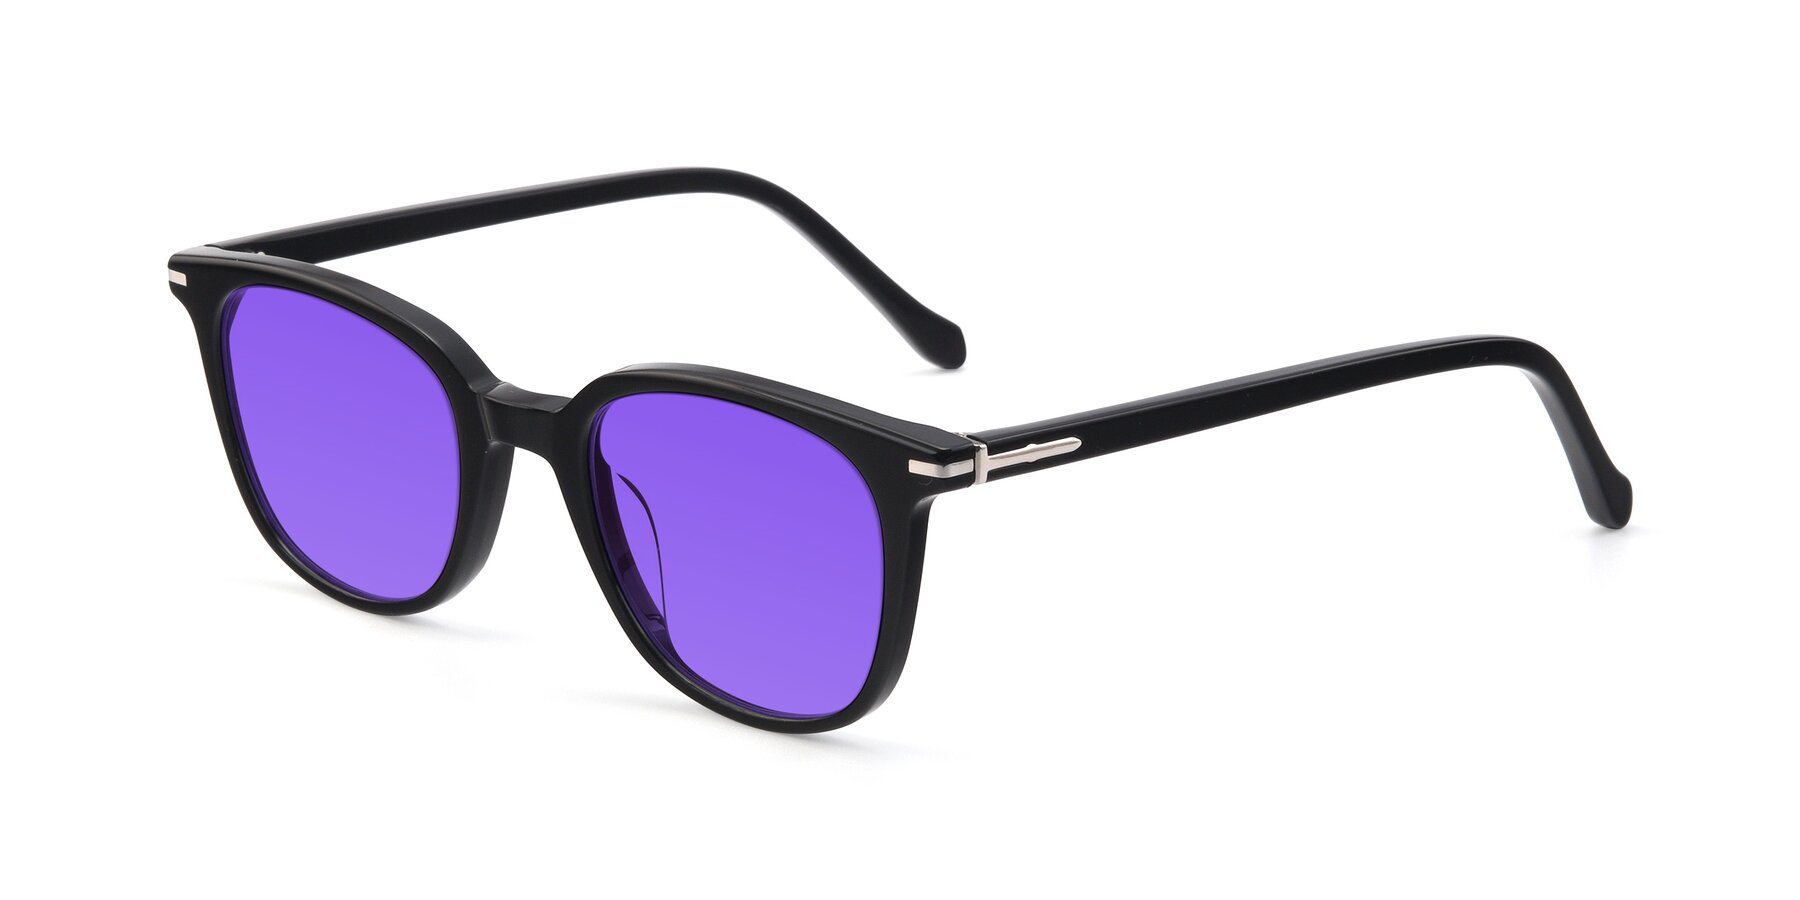 Angle of 17562 in Black with Purple Tinted Lenses